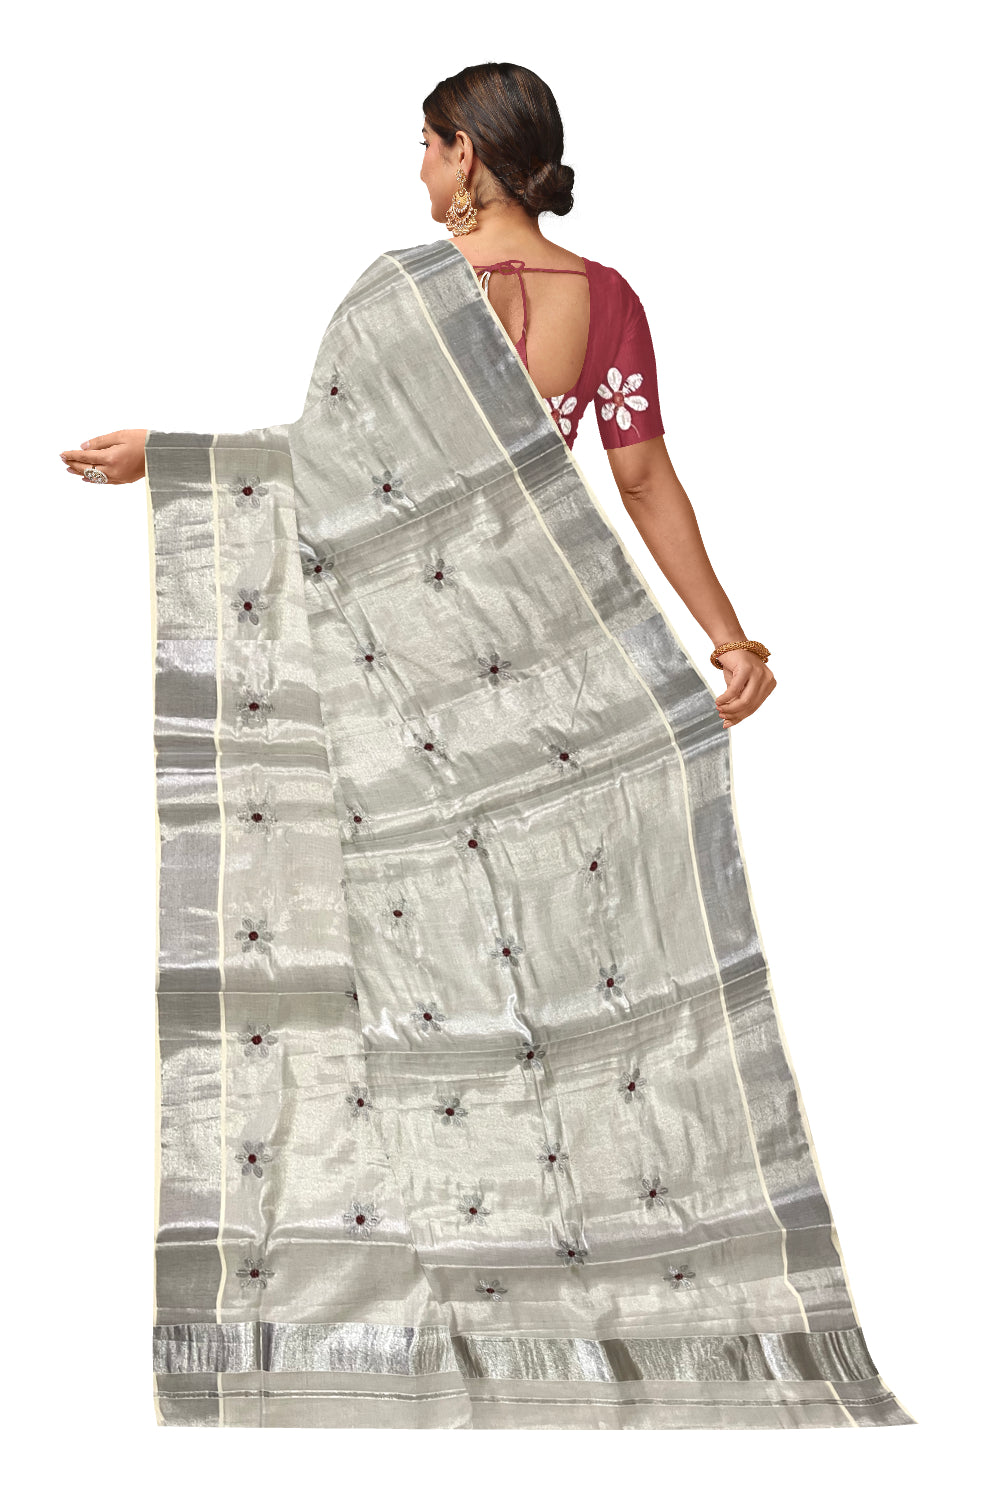 Kerala Silver Tissue Kasavu Saree with Floral Embroidery Works on Body and Maroon Blouse Piece